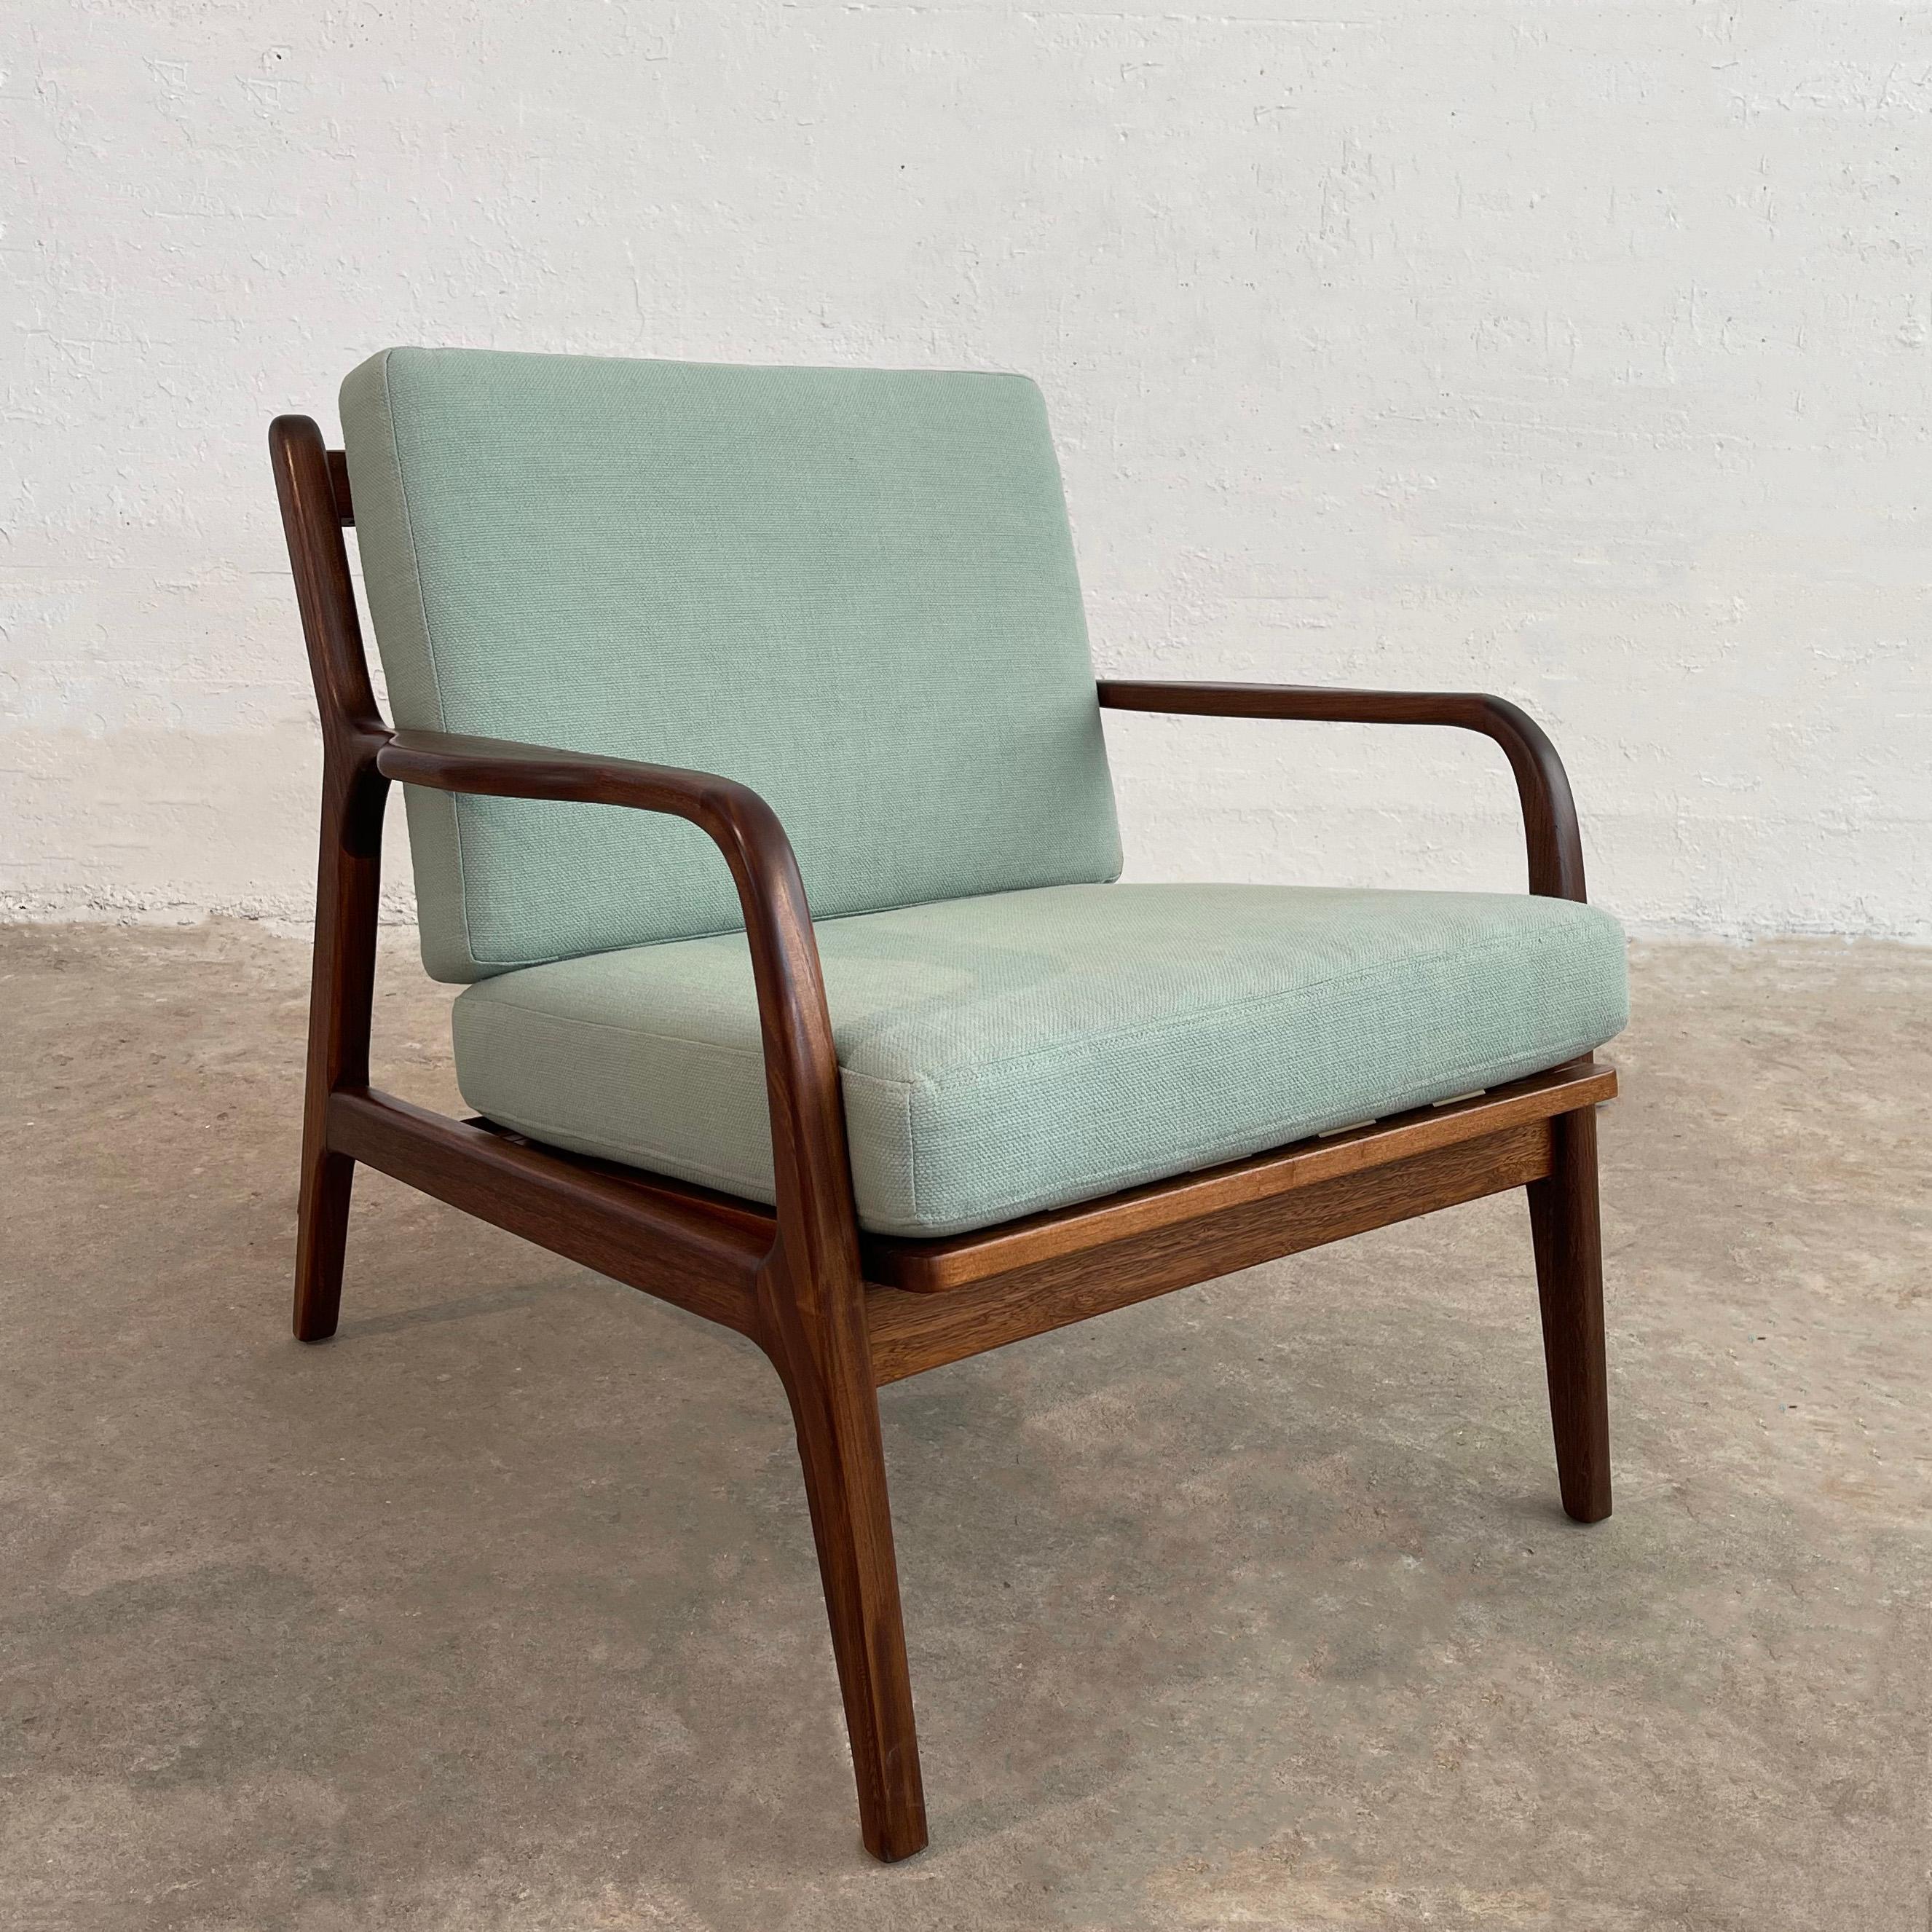 Classic, Scandinavian modern, lounge chair features a walnut frame with slat back and sculpted armrests and bentwood arms at 20.5 inches height. The cushions are newly upholstered in light blue linen cotton to contrast nicely with the dark walnut